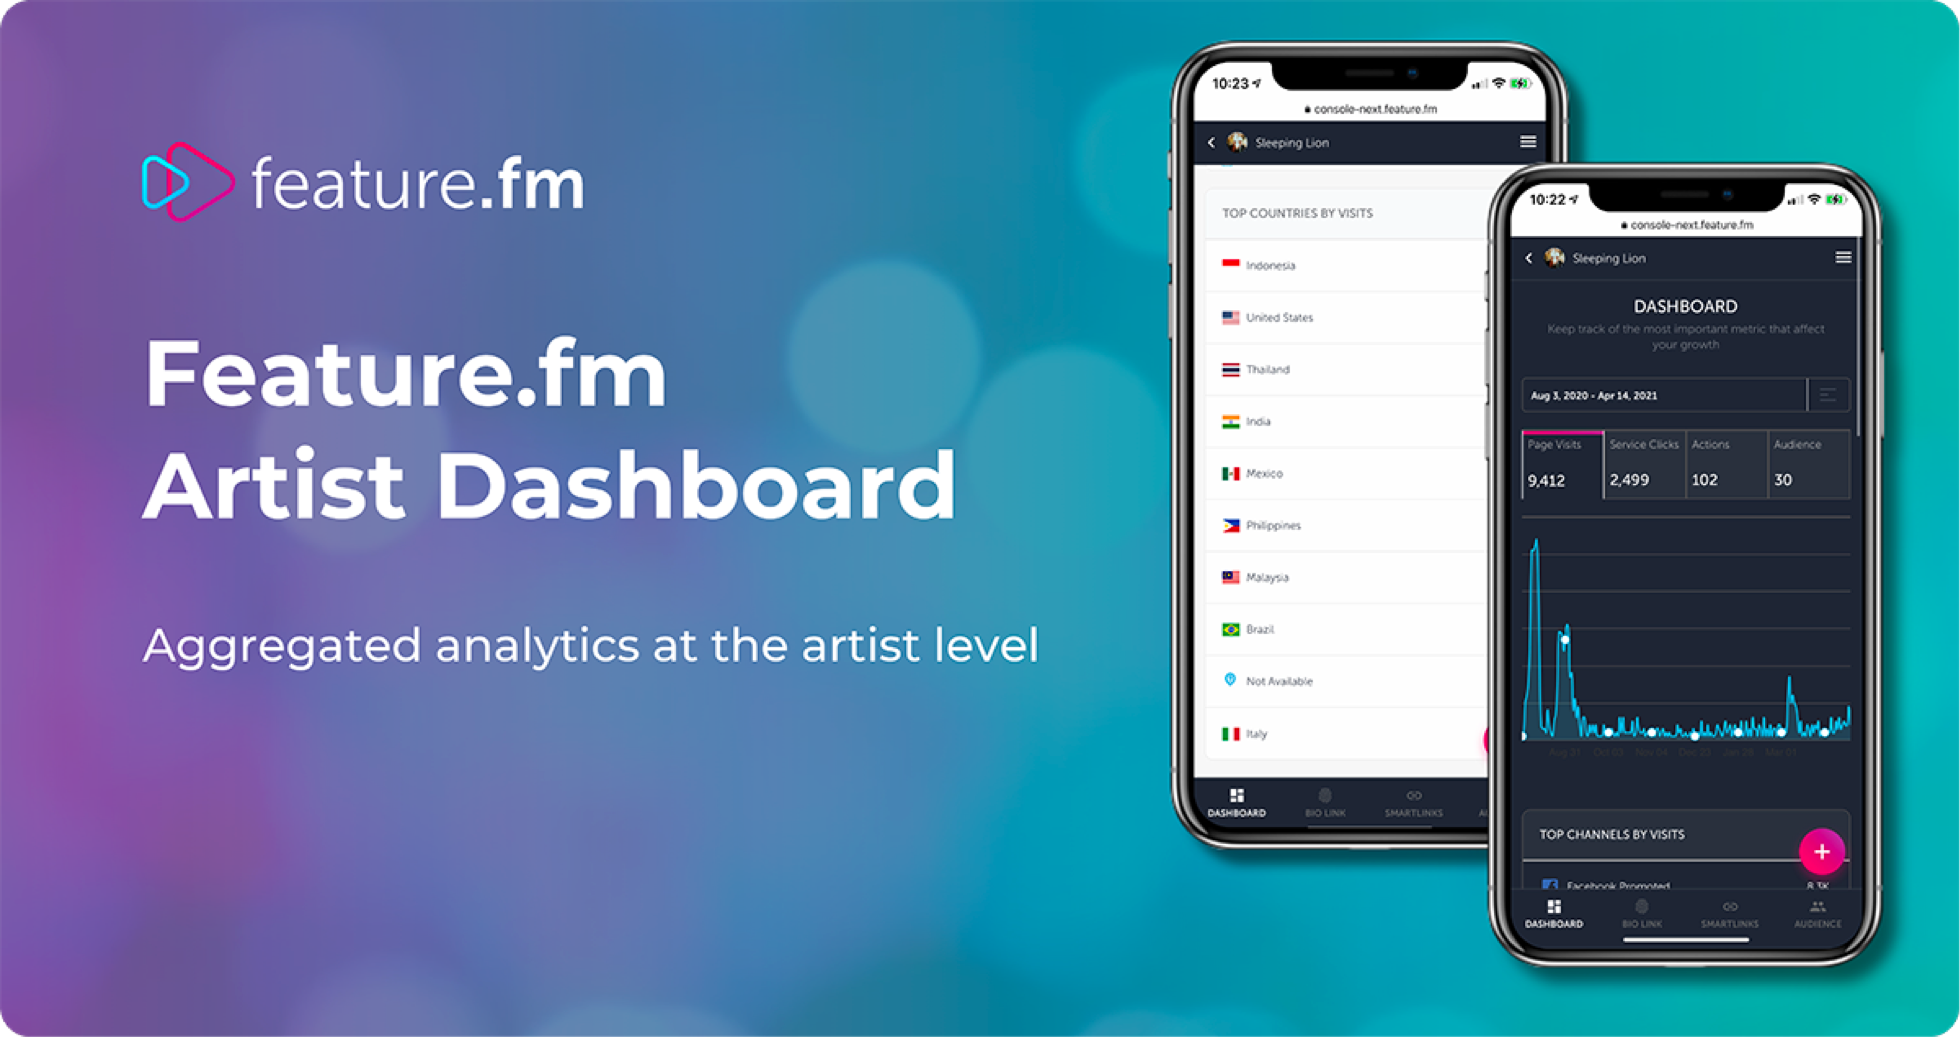 Your new Feature.fm Artist Dashboard aggregates all of your growth metrics